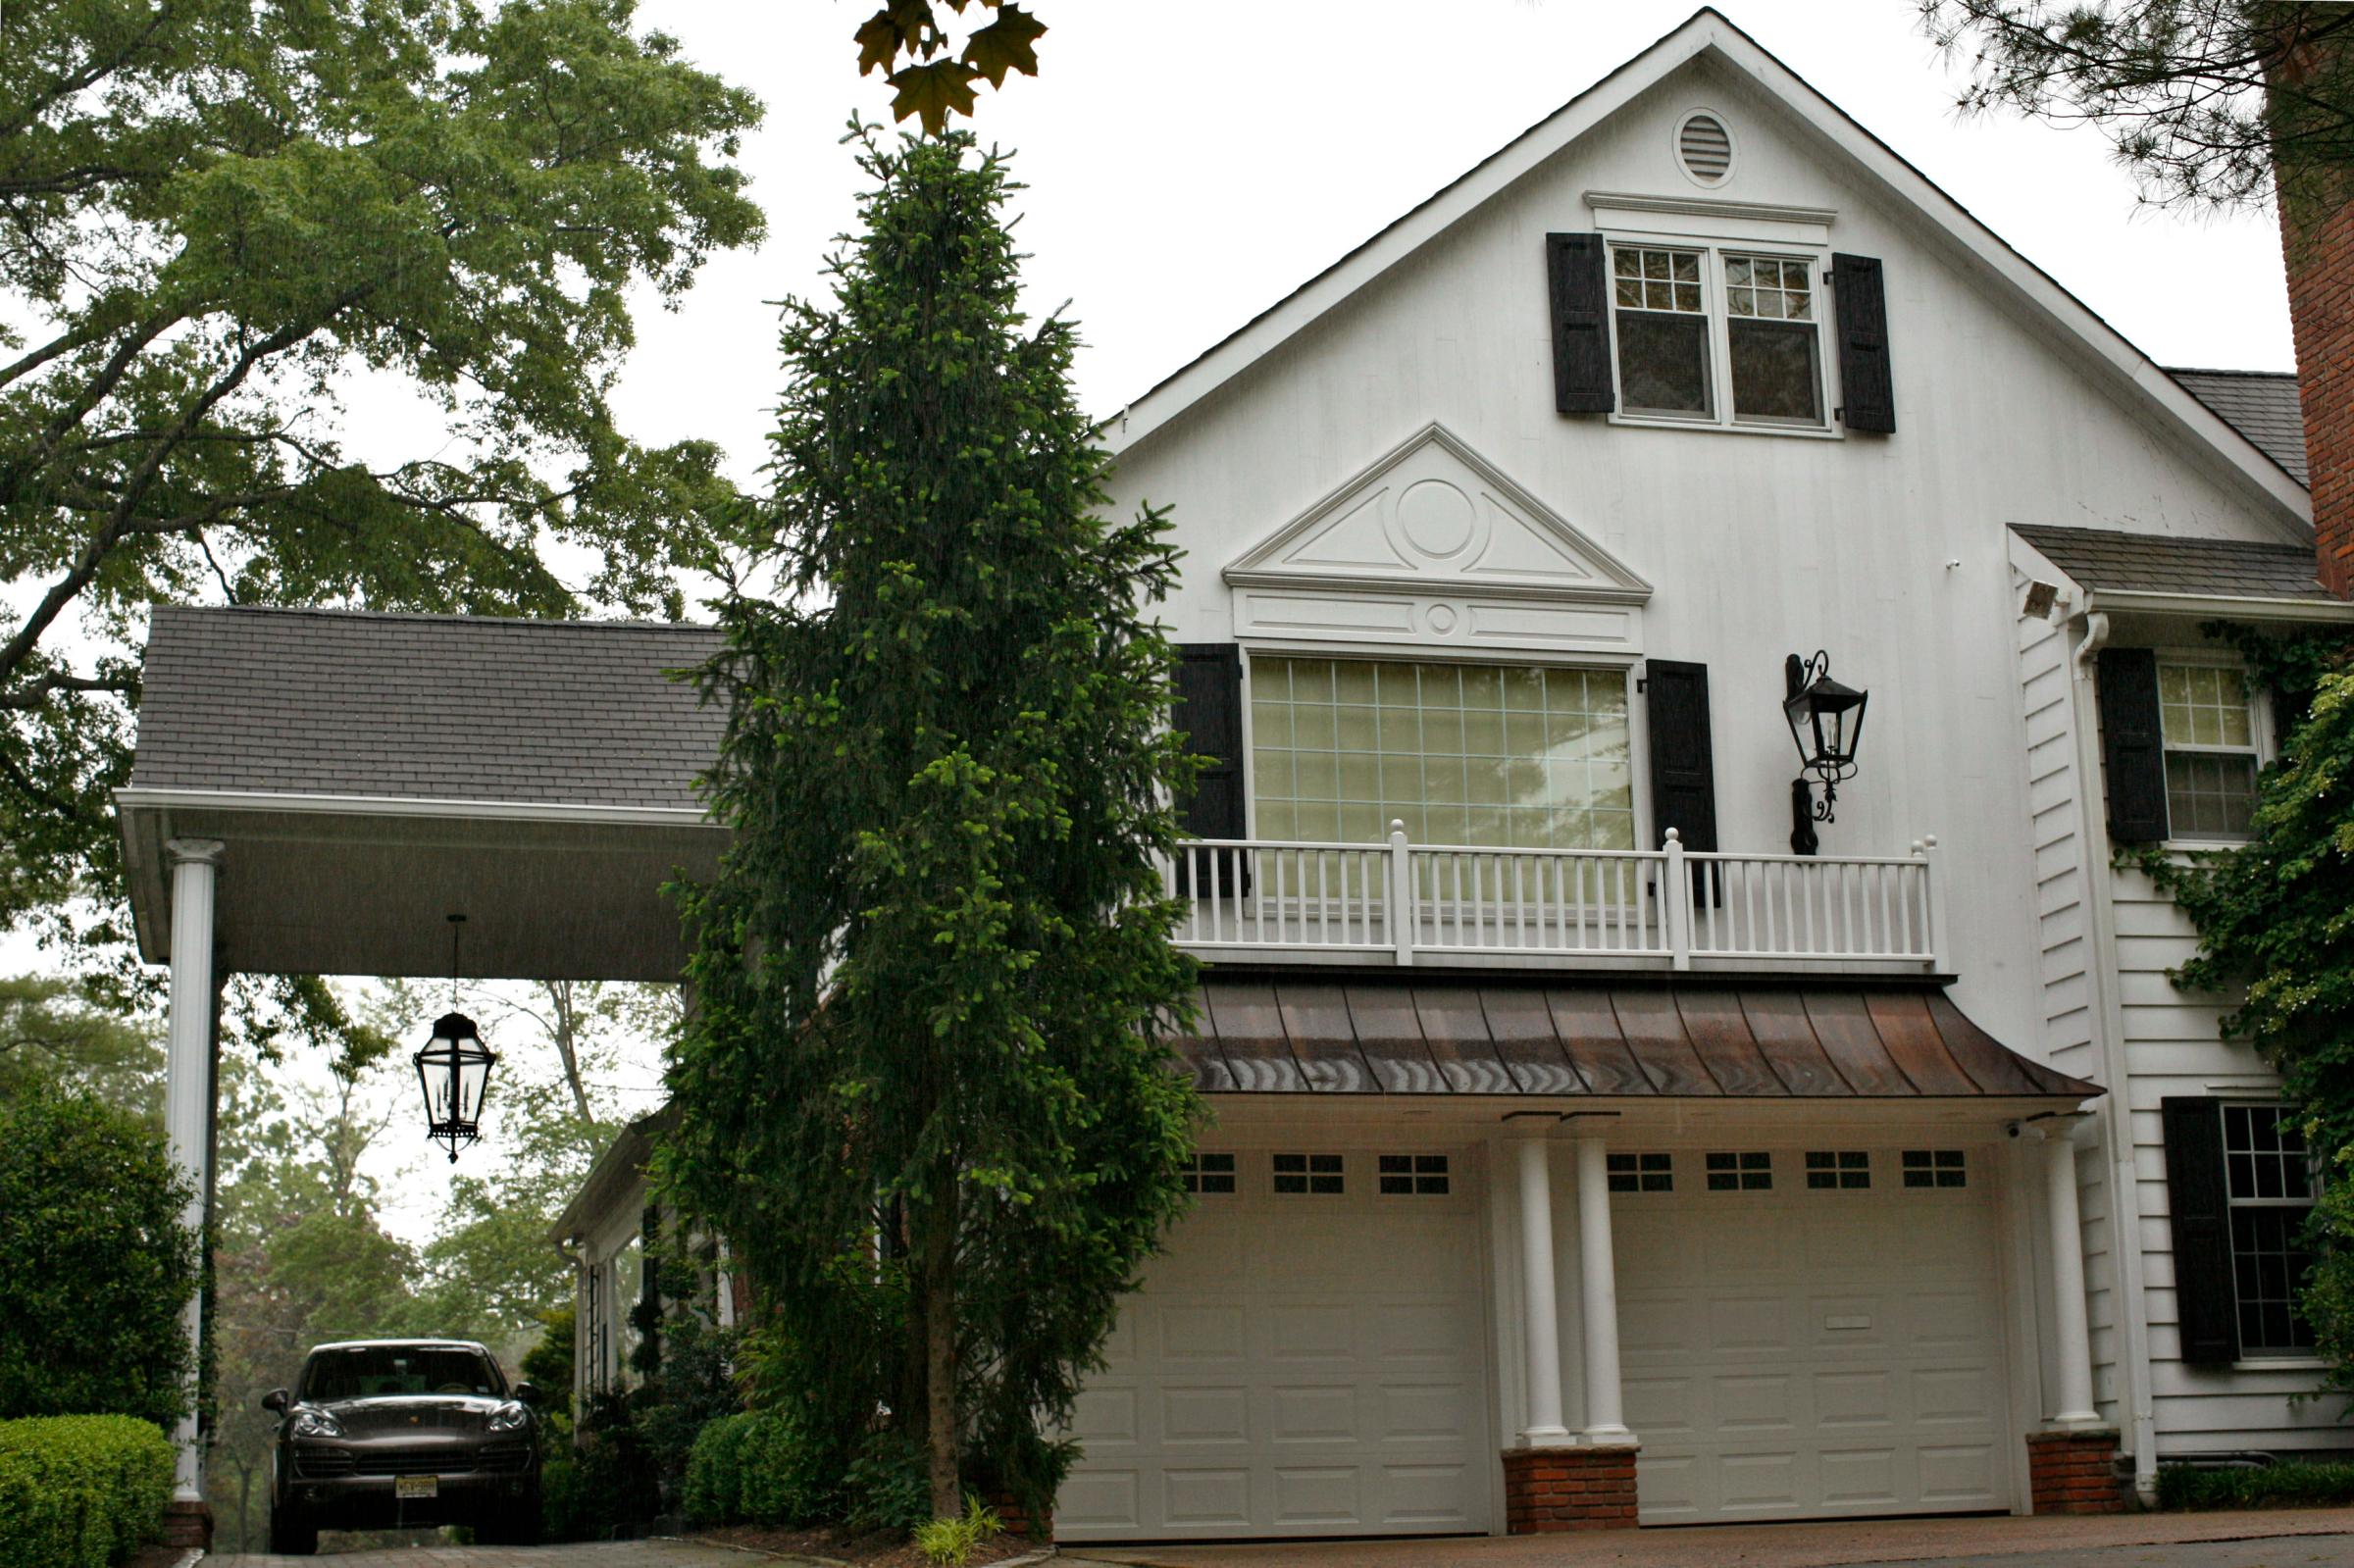 A view of the home of former JP Morgan chief investment officer Ina Drew in Short Hills, New Jersey